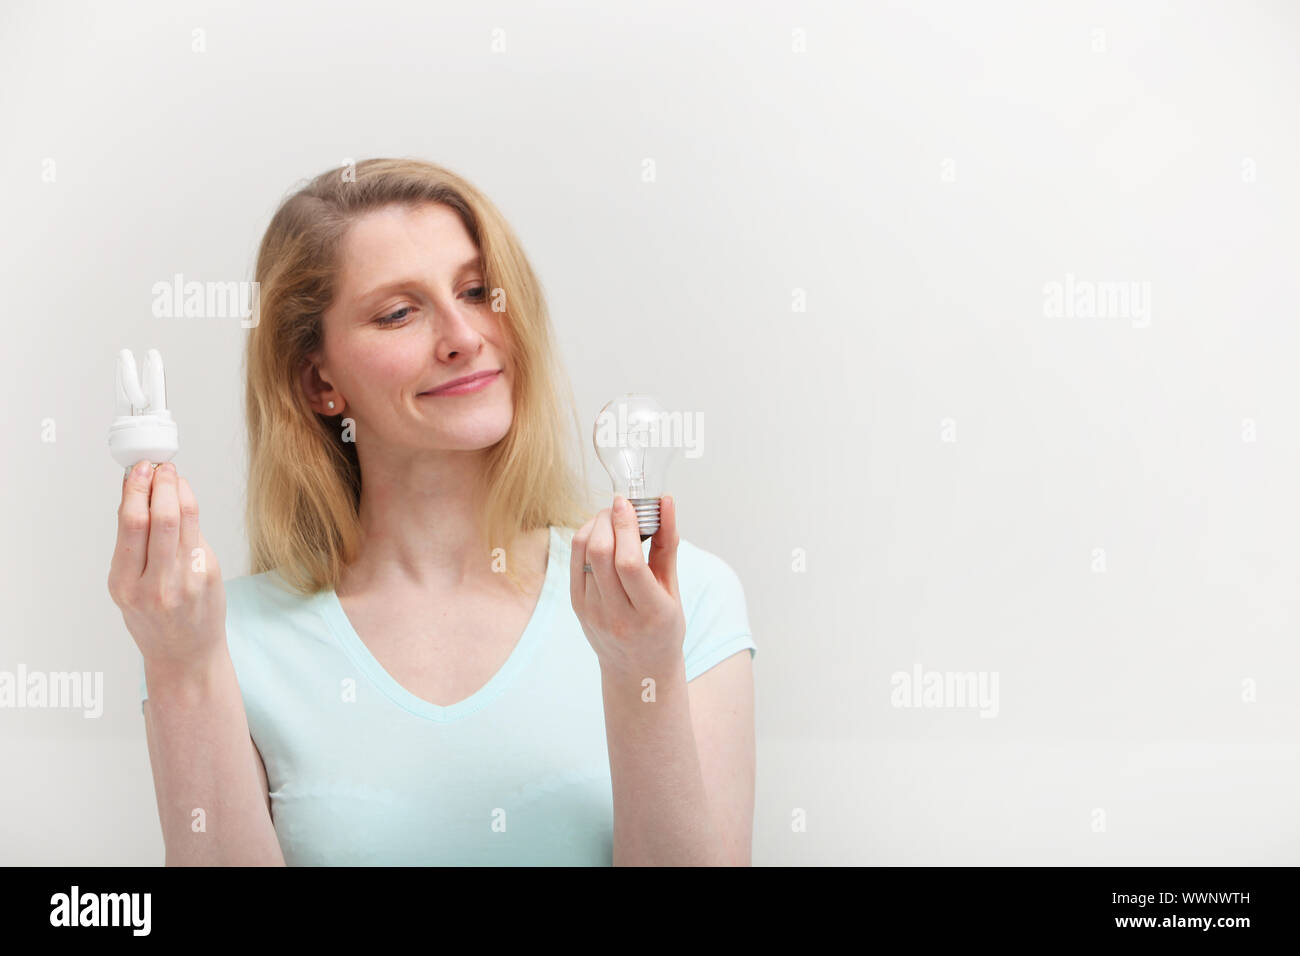 Woman holding an eco-friendly spiral fluorescent bulb in one hand looks at an old inefficient incandescent bulb in her other hand with regret as she m Stock Photo